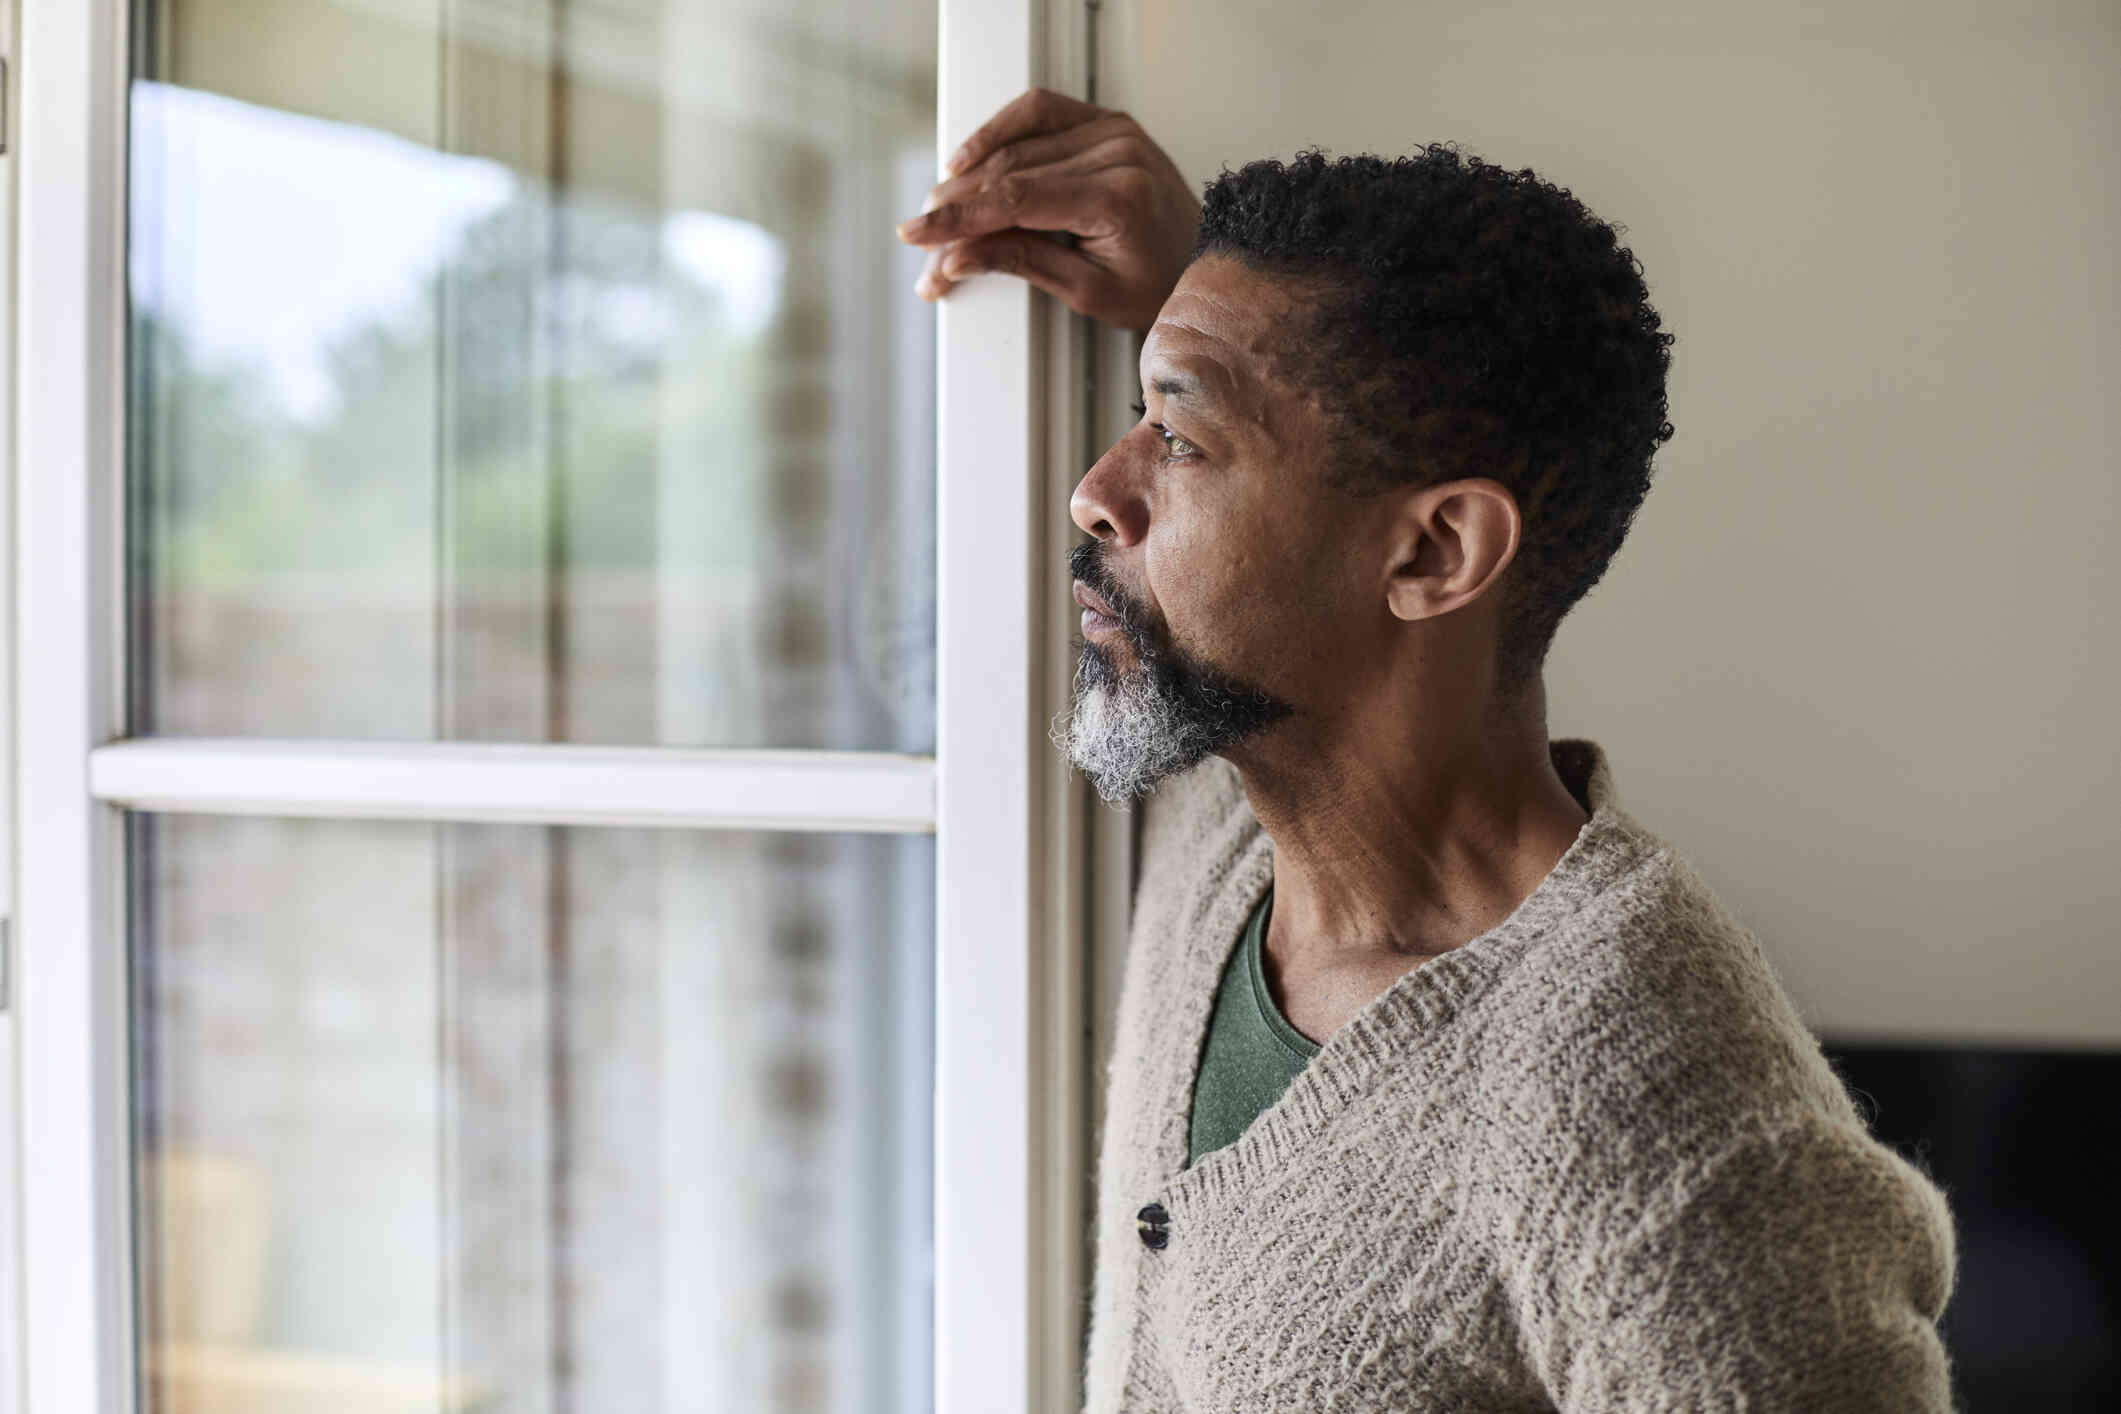 A close up of a middle aged man as he leans against a window frame and gazes out of the window while deep in thought.